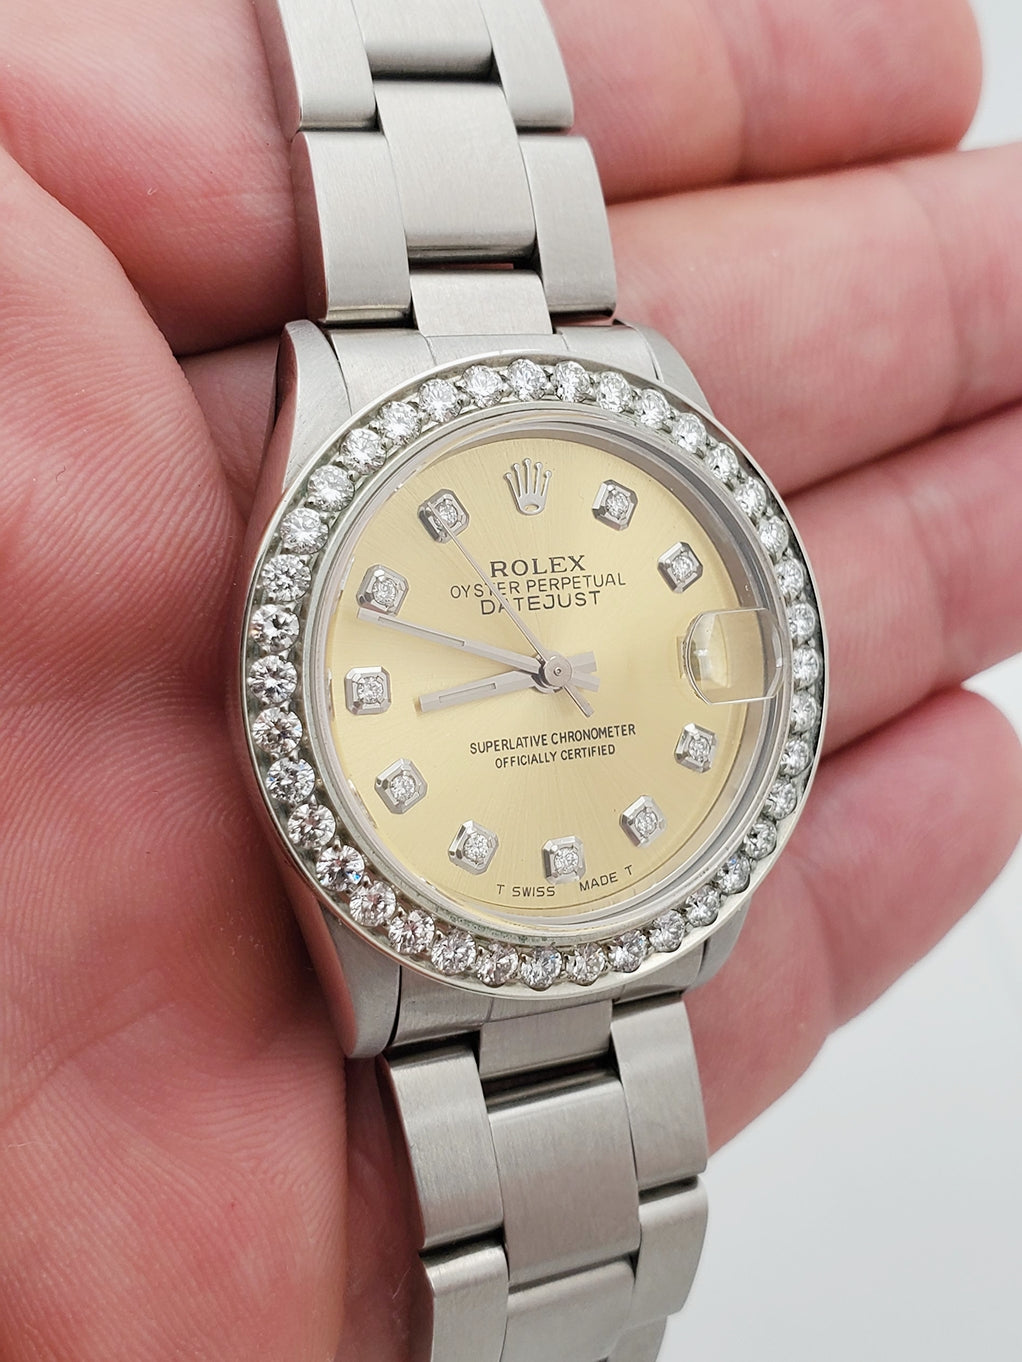 Ladies Midsize Rolex DateJust 31mm Stainless Steel Watch with Champagne Diamond Dial and Diamond Bezel. (Pre-Owned)